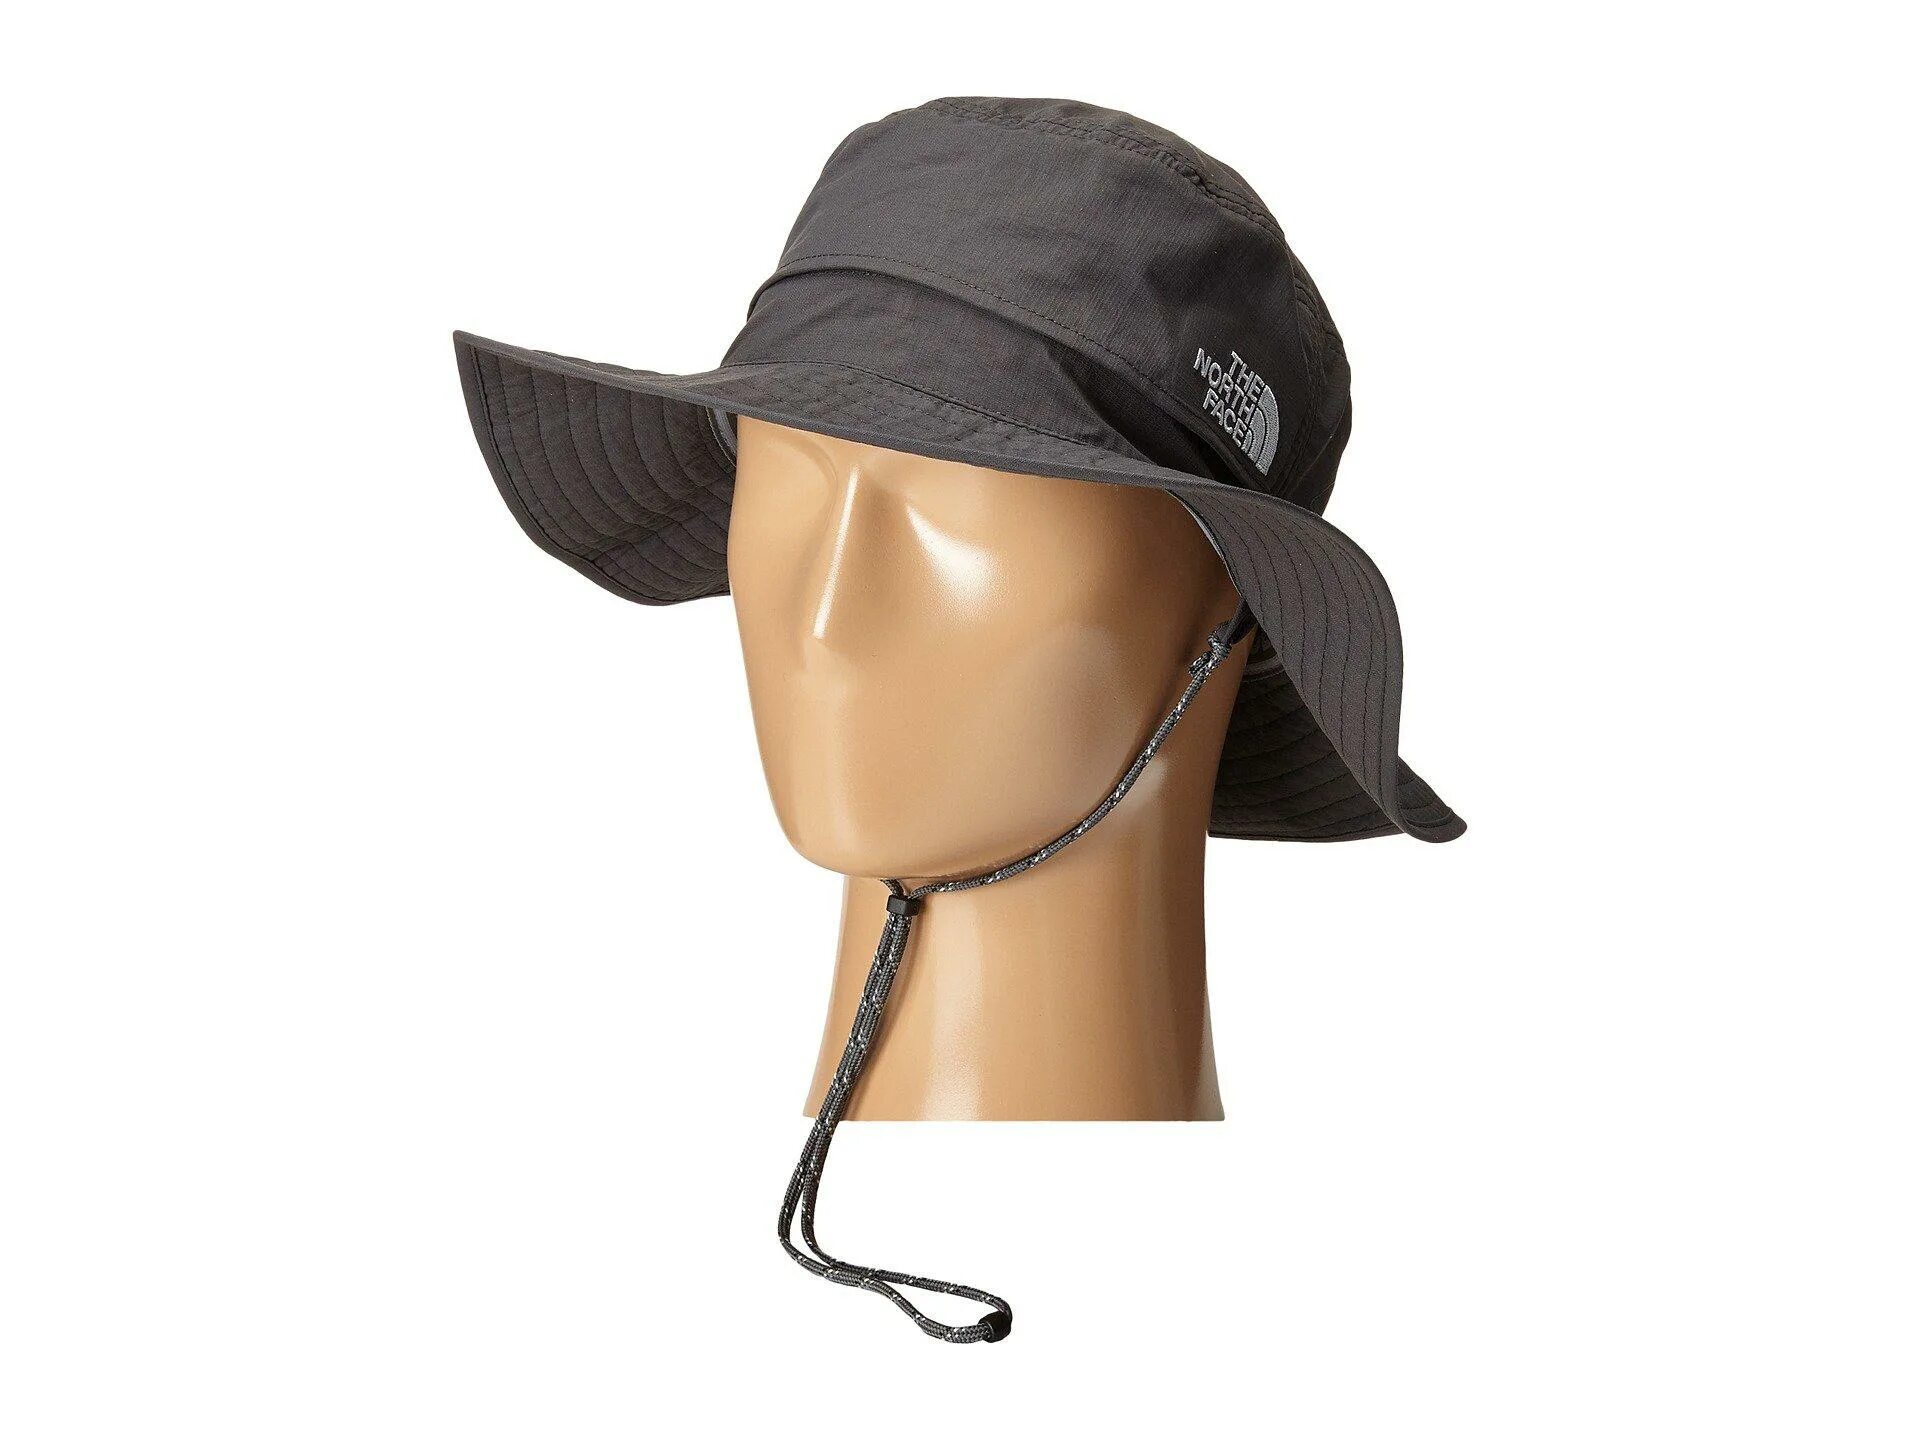 The North face Horizon Breeze Brimmer hat. Horizon Breeze Brimmer. North face Horizon Brimmer. Шляпа the North face. N hats